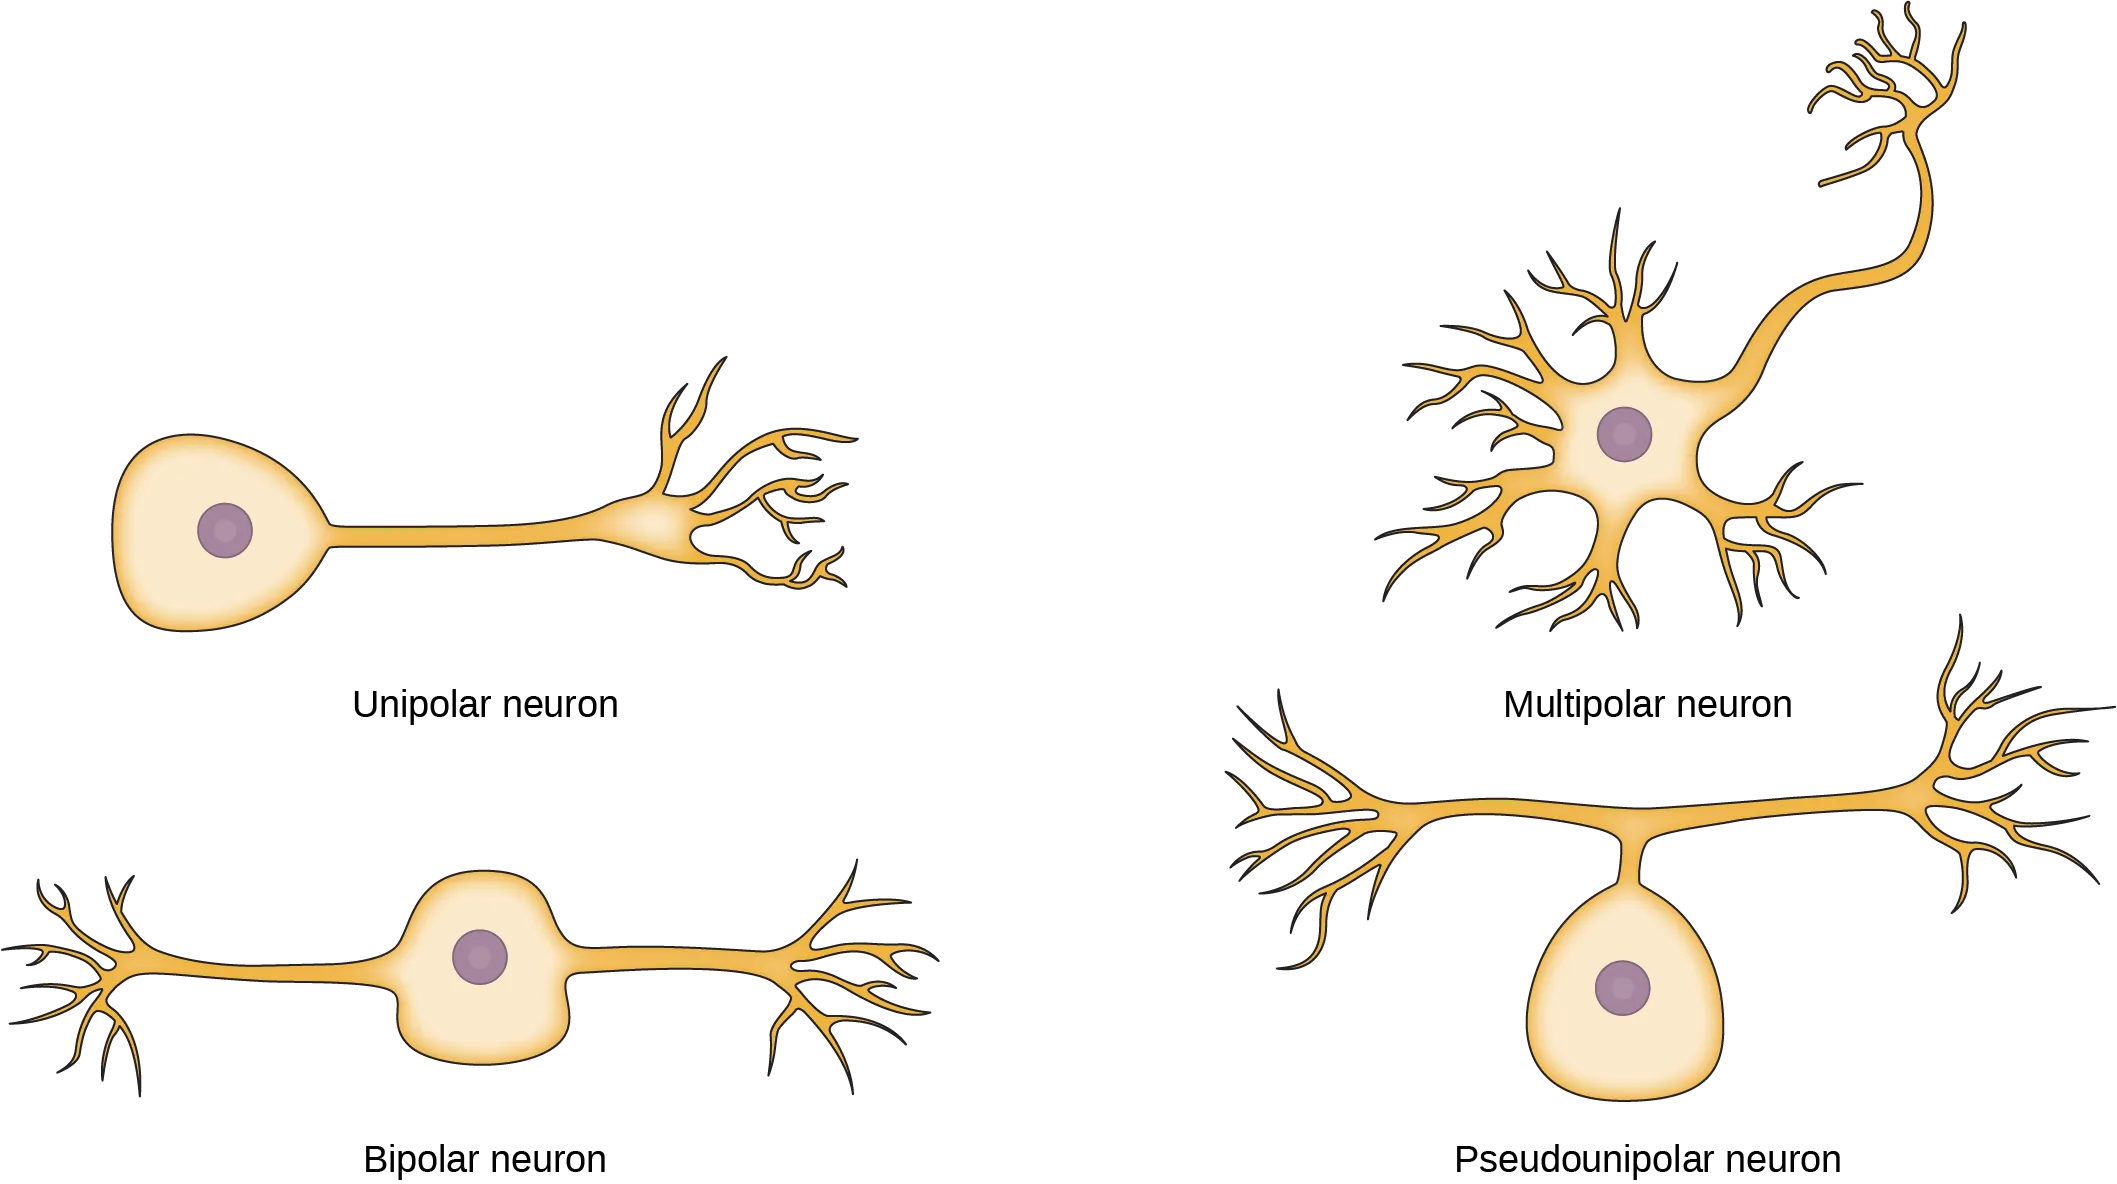 The unipolar cell has a single, long axon extending from the cell body. The bipolar neuron has two axons projecting from opposite sides of the cell body. The multipolar neuron has one long axon and several short, highly branched axons extending in all directions. The pseudounipolar neuron has one axon that forms two branches a short distance from the cell body, each of which extends in a different direction.